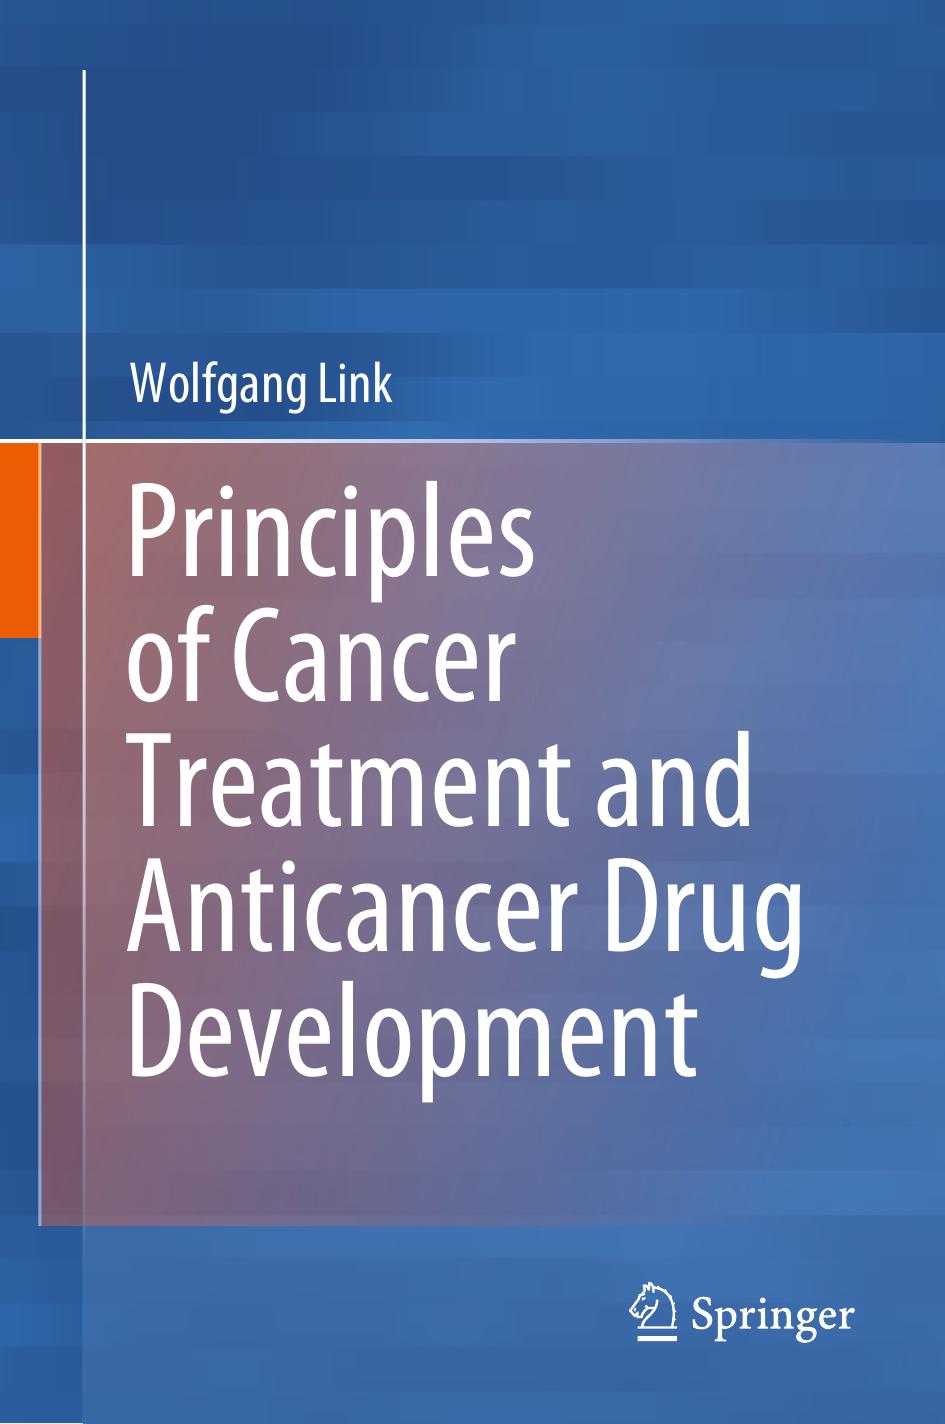 Principles of Cancer Treatment and Anticancer Drug Development by Wolfgang Link